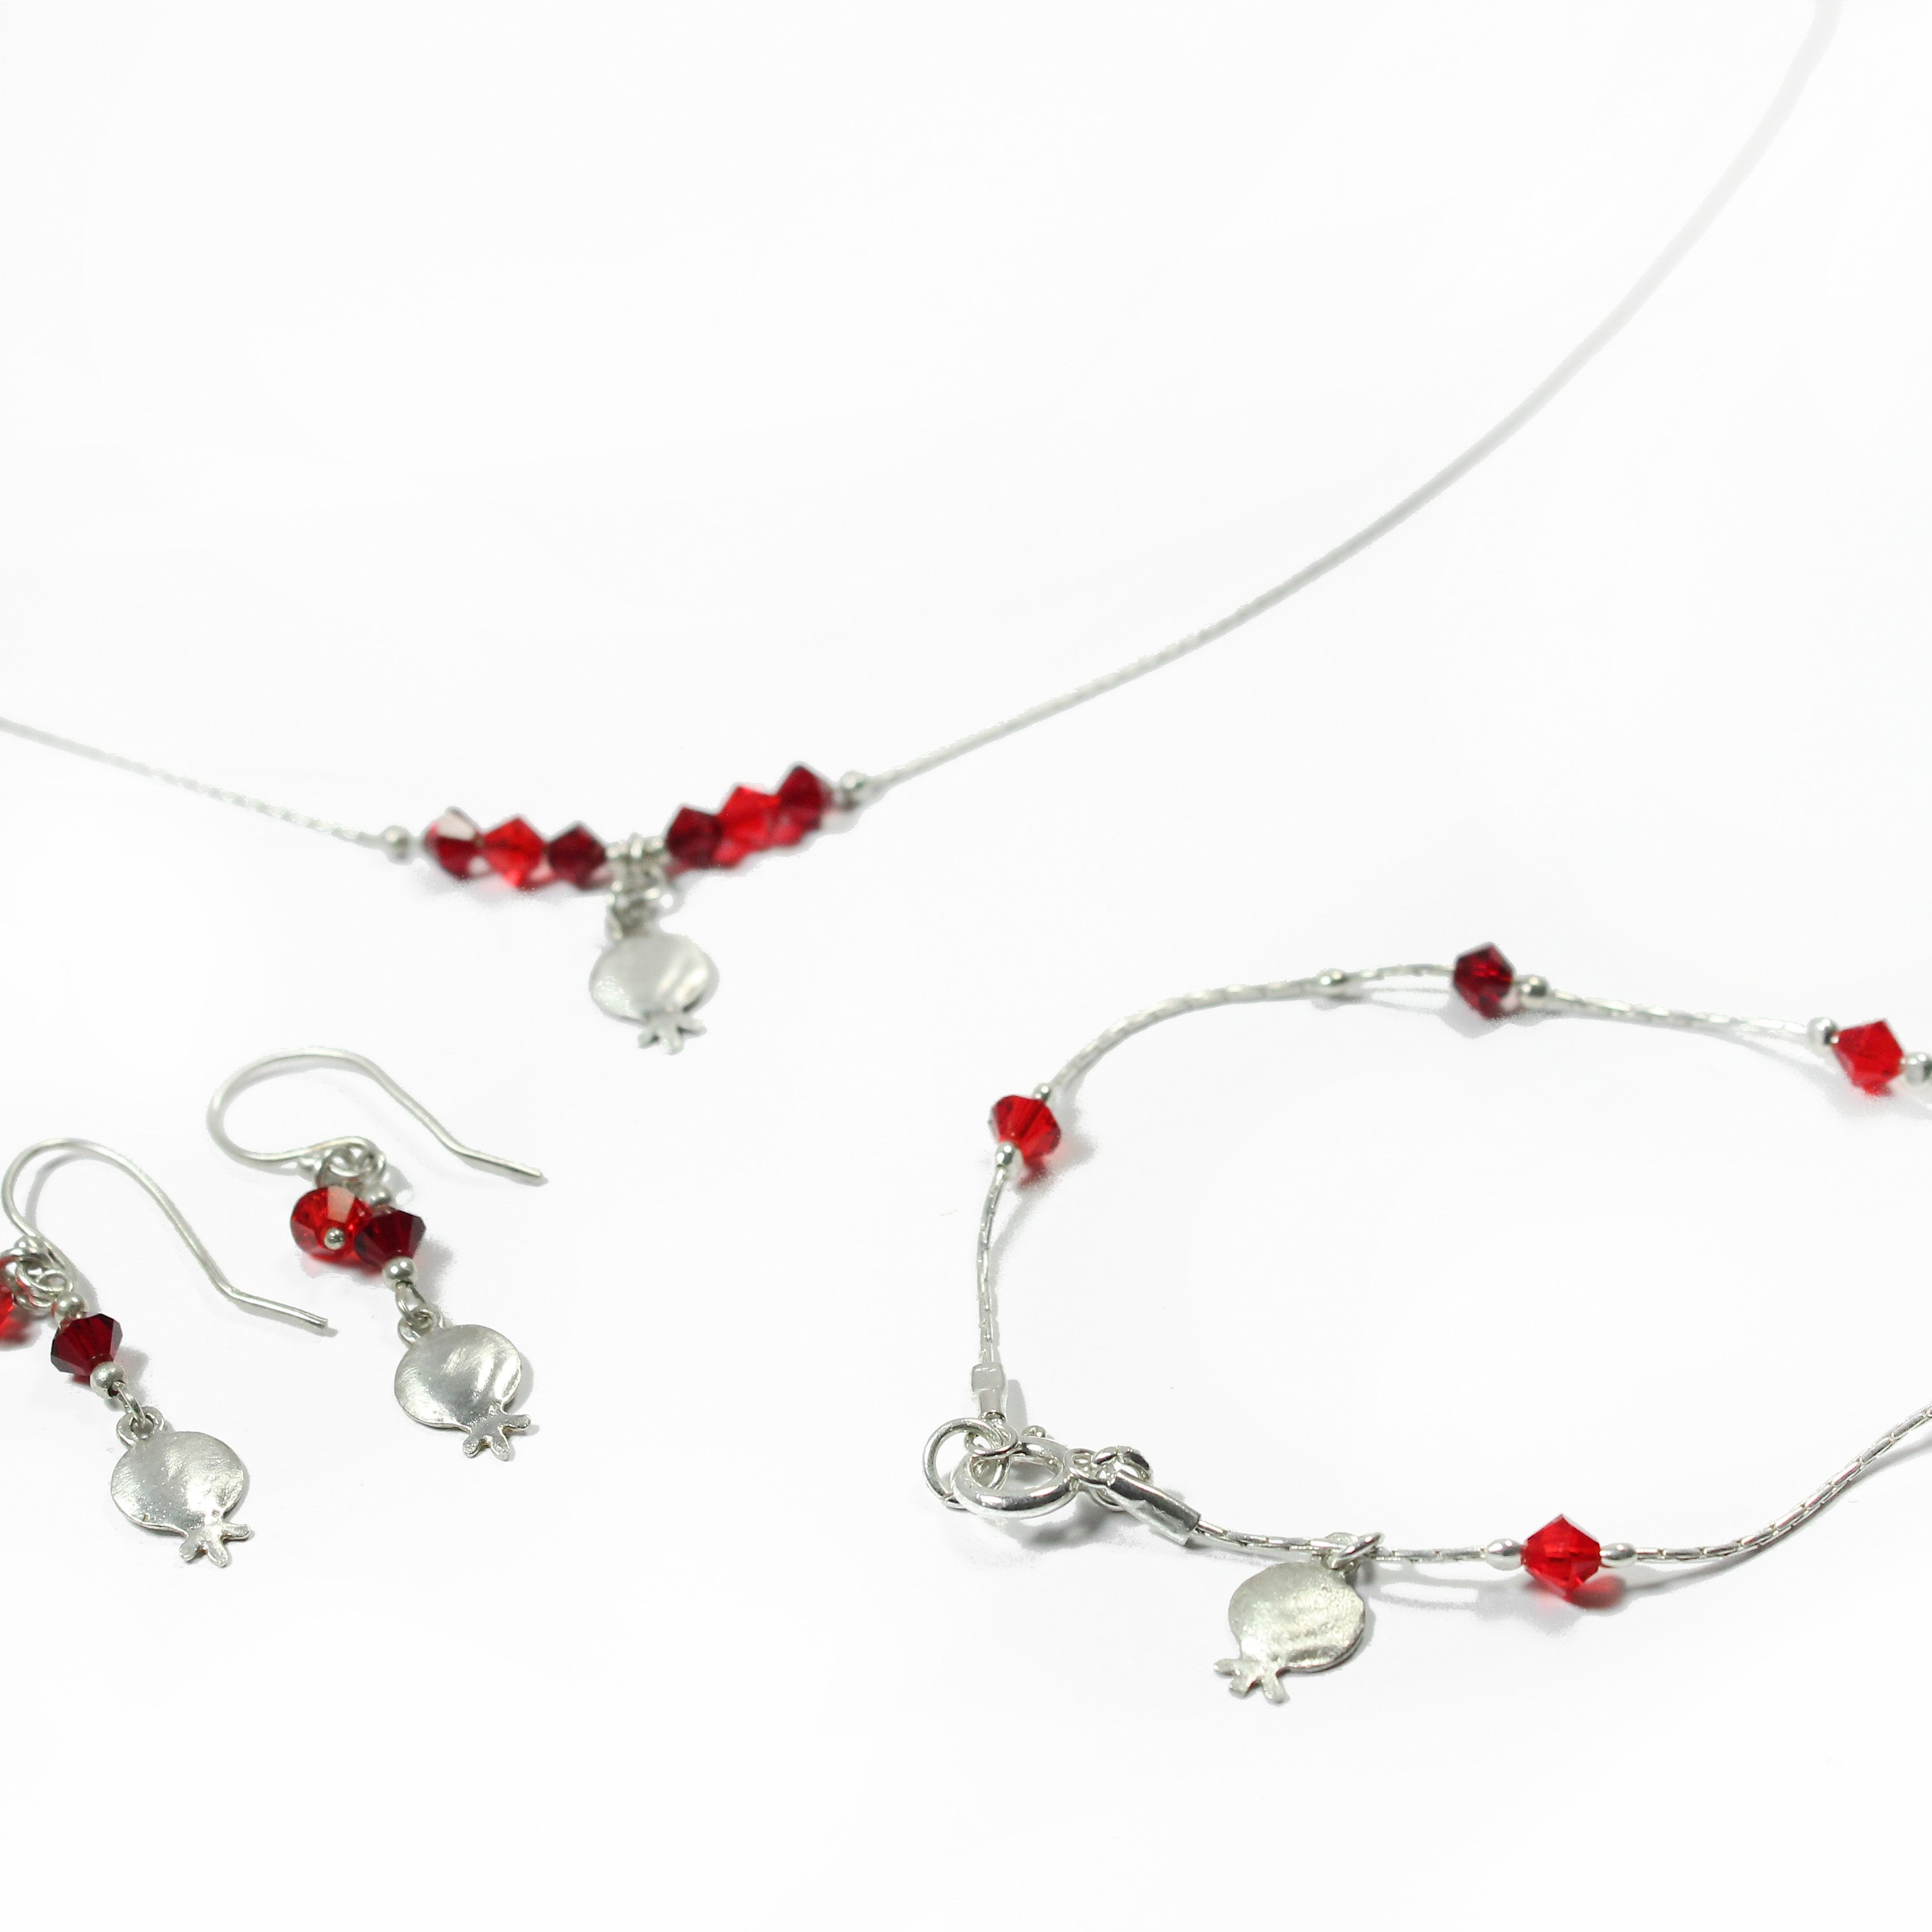 Swarovski and Silver Pomegranate Jewelry Set - Shulamit Kanter Official Store